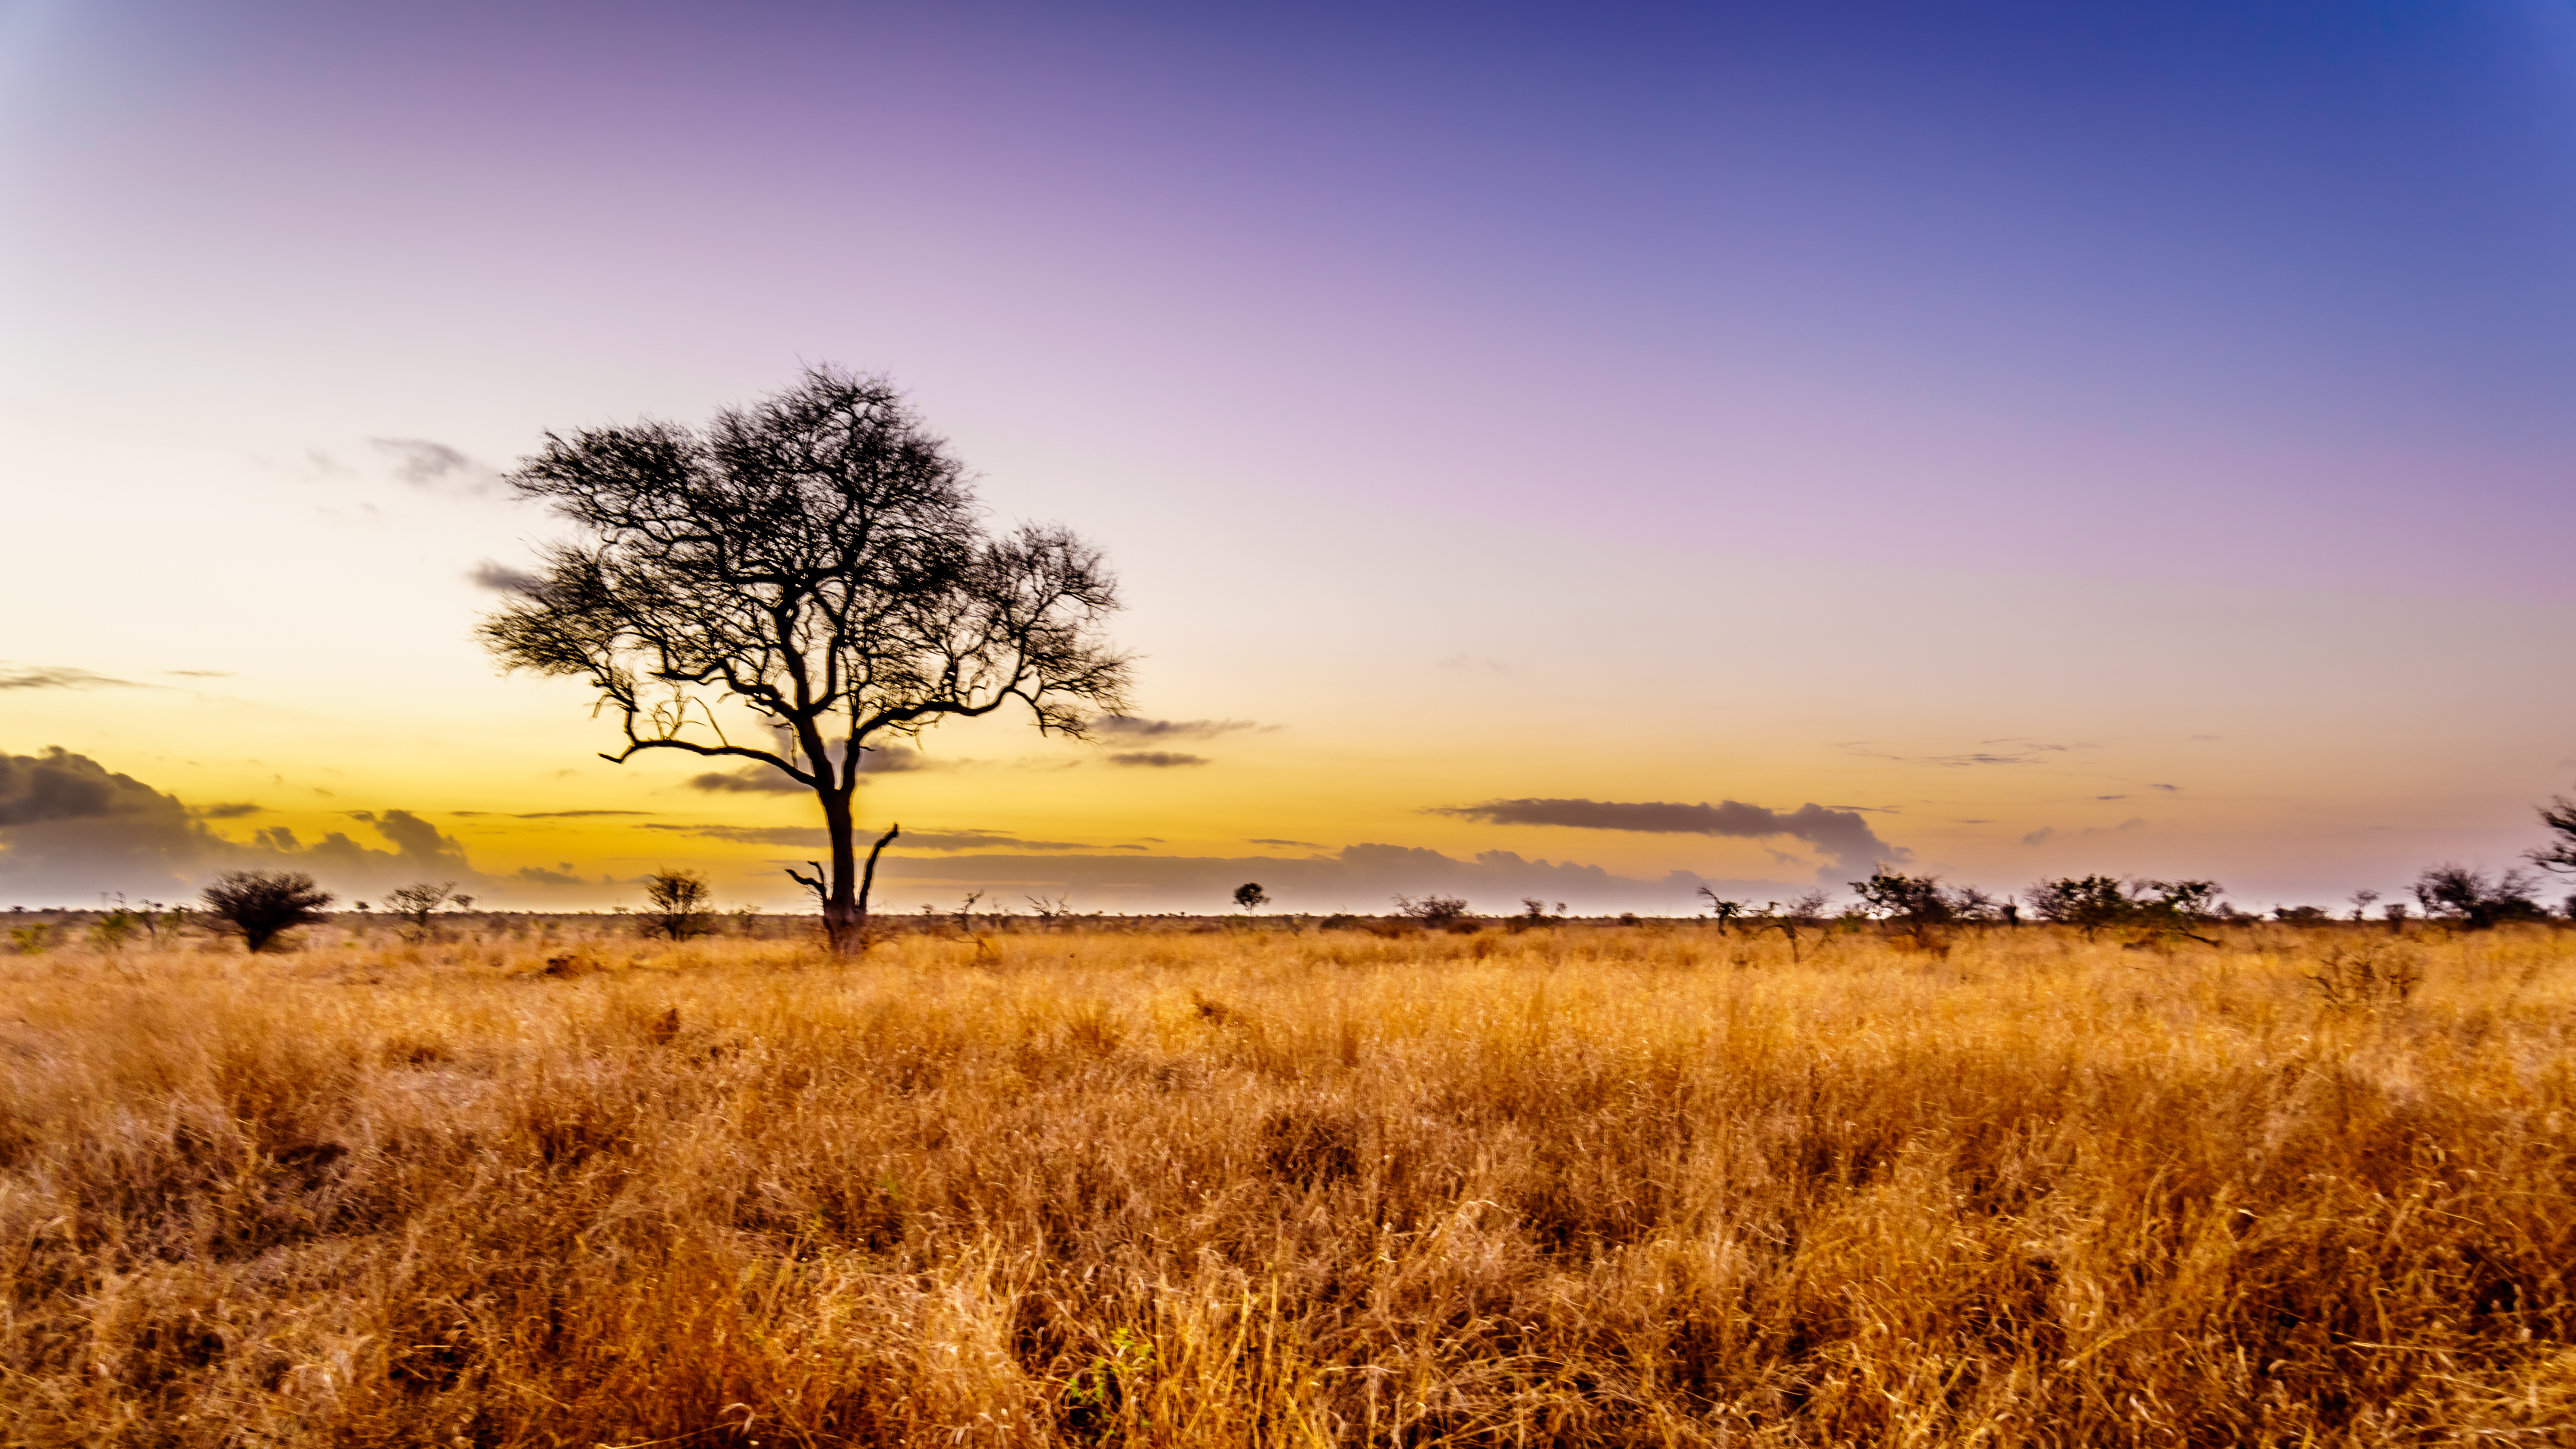 Savannah-type landscapes create positive and relaxing emotions due to our evolution